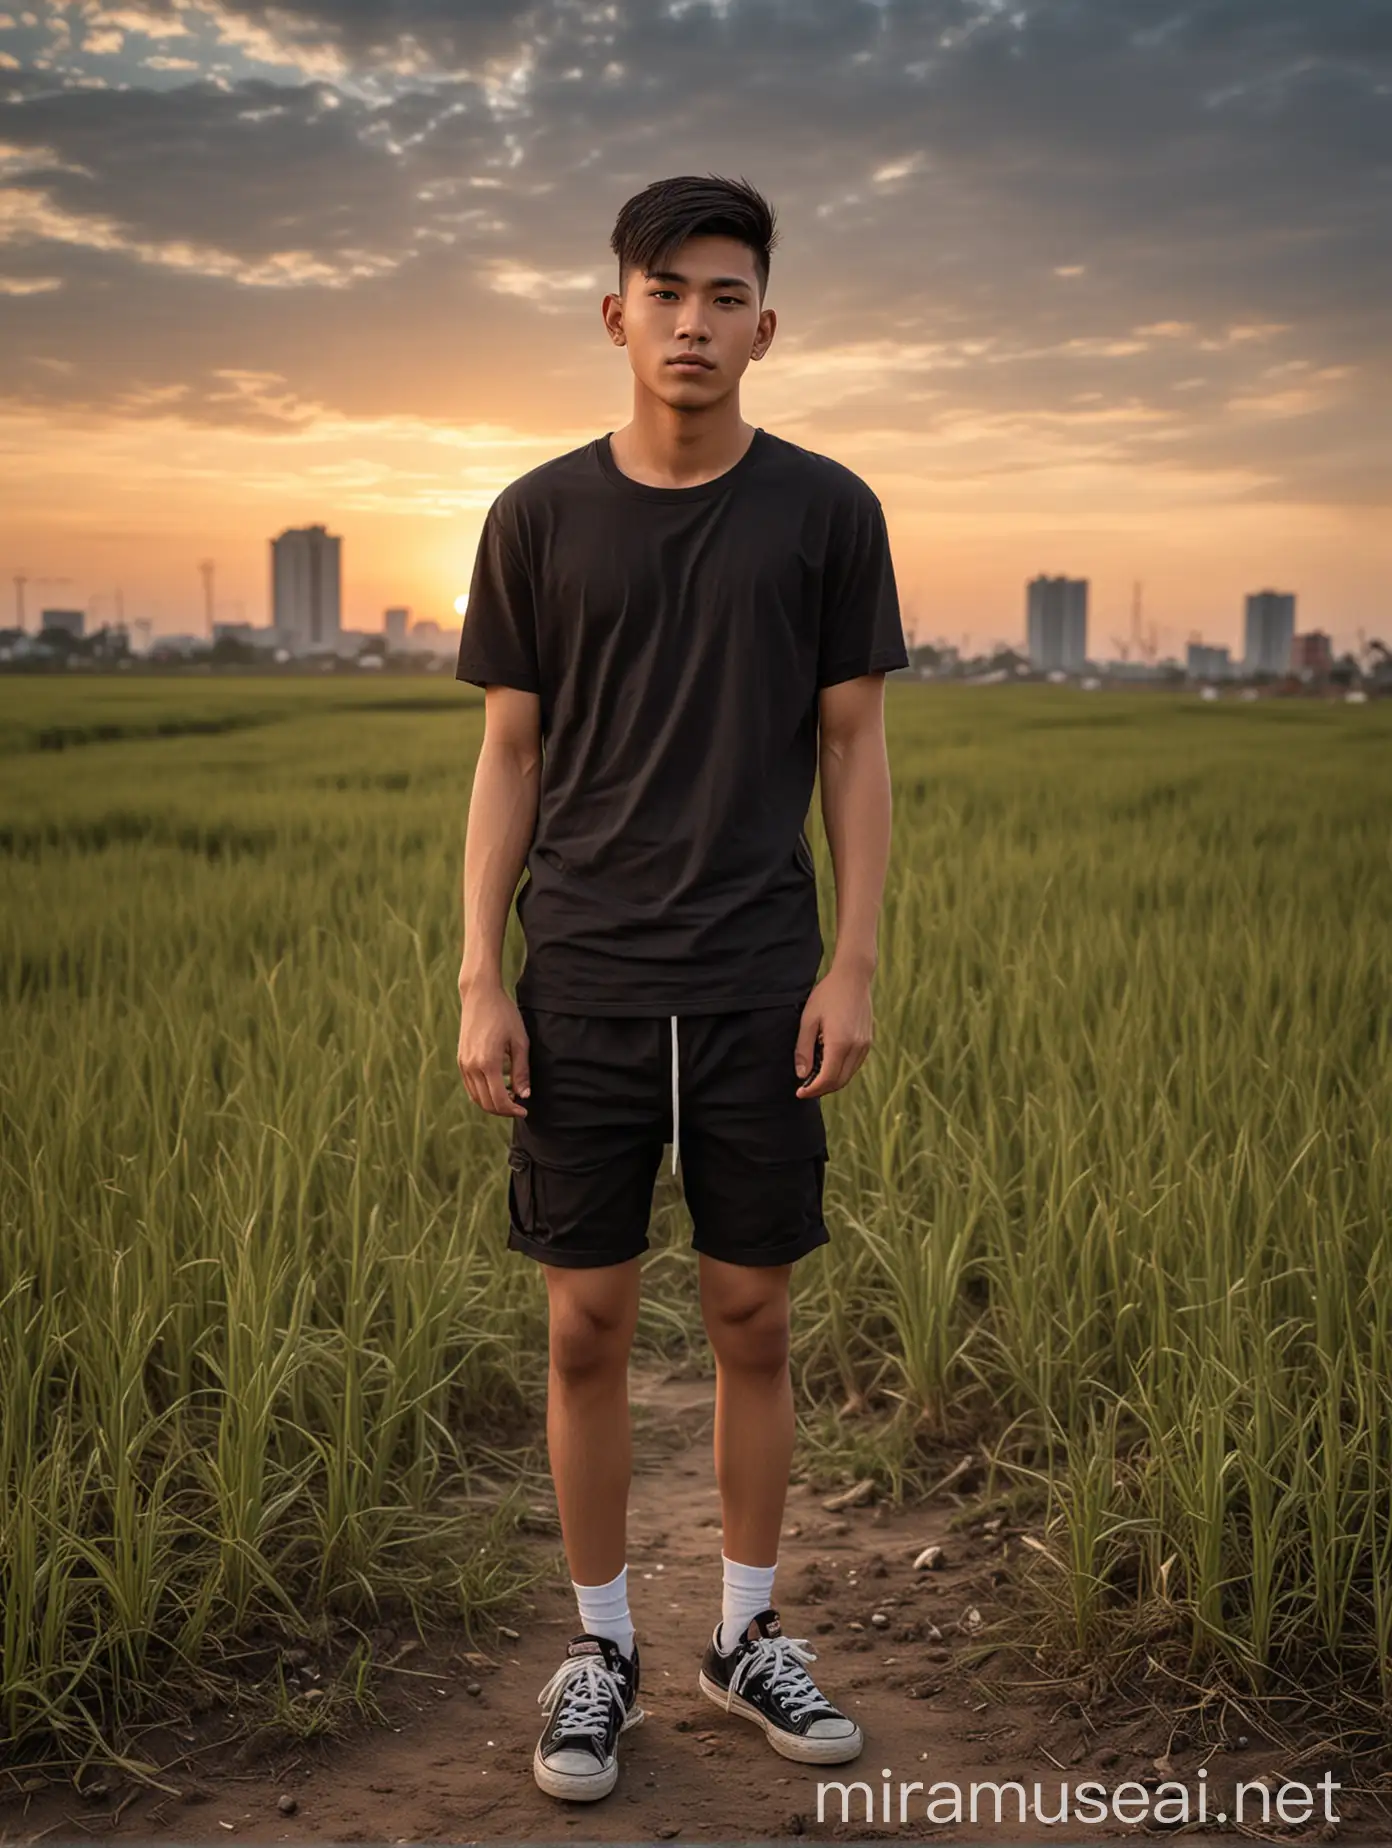 Dynamic realistic photo, thin body, Man 20 years old from indonesia, very short undercut hairstyle,  wearing black t-shirt, short pants, sneakers shoes, sunrise vibes at field, real photo